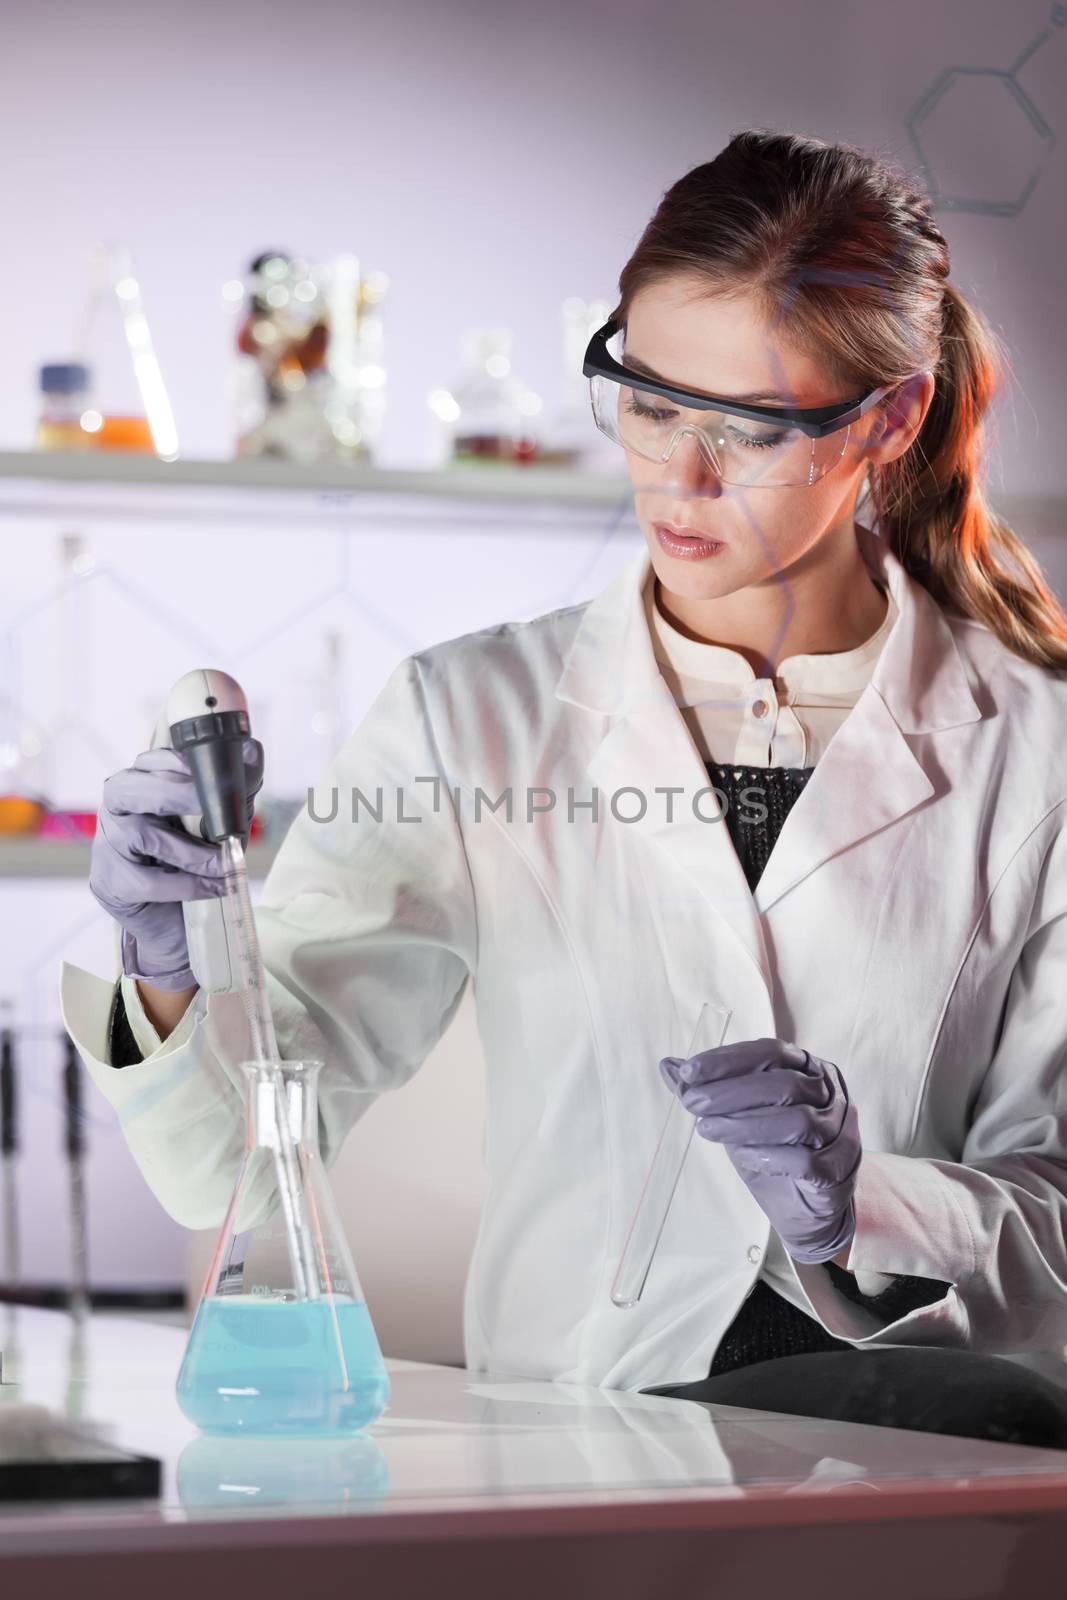 Life scientists researching in laboratory. Focused female life science professional pipetting solution into the glass cuvette. Lens focus on researcher's eyes. Healthcare and biotechnology concept.